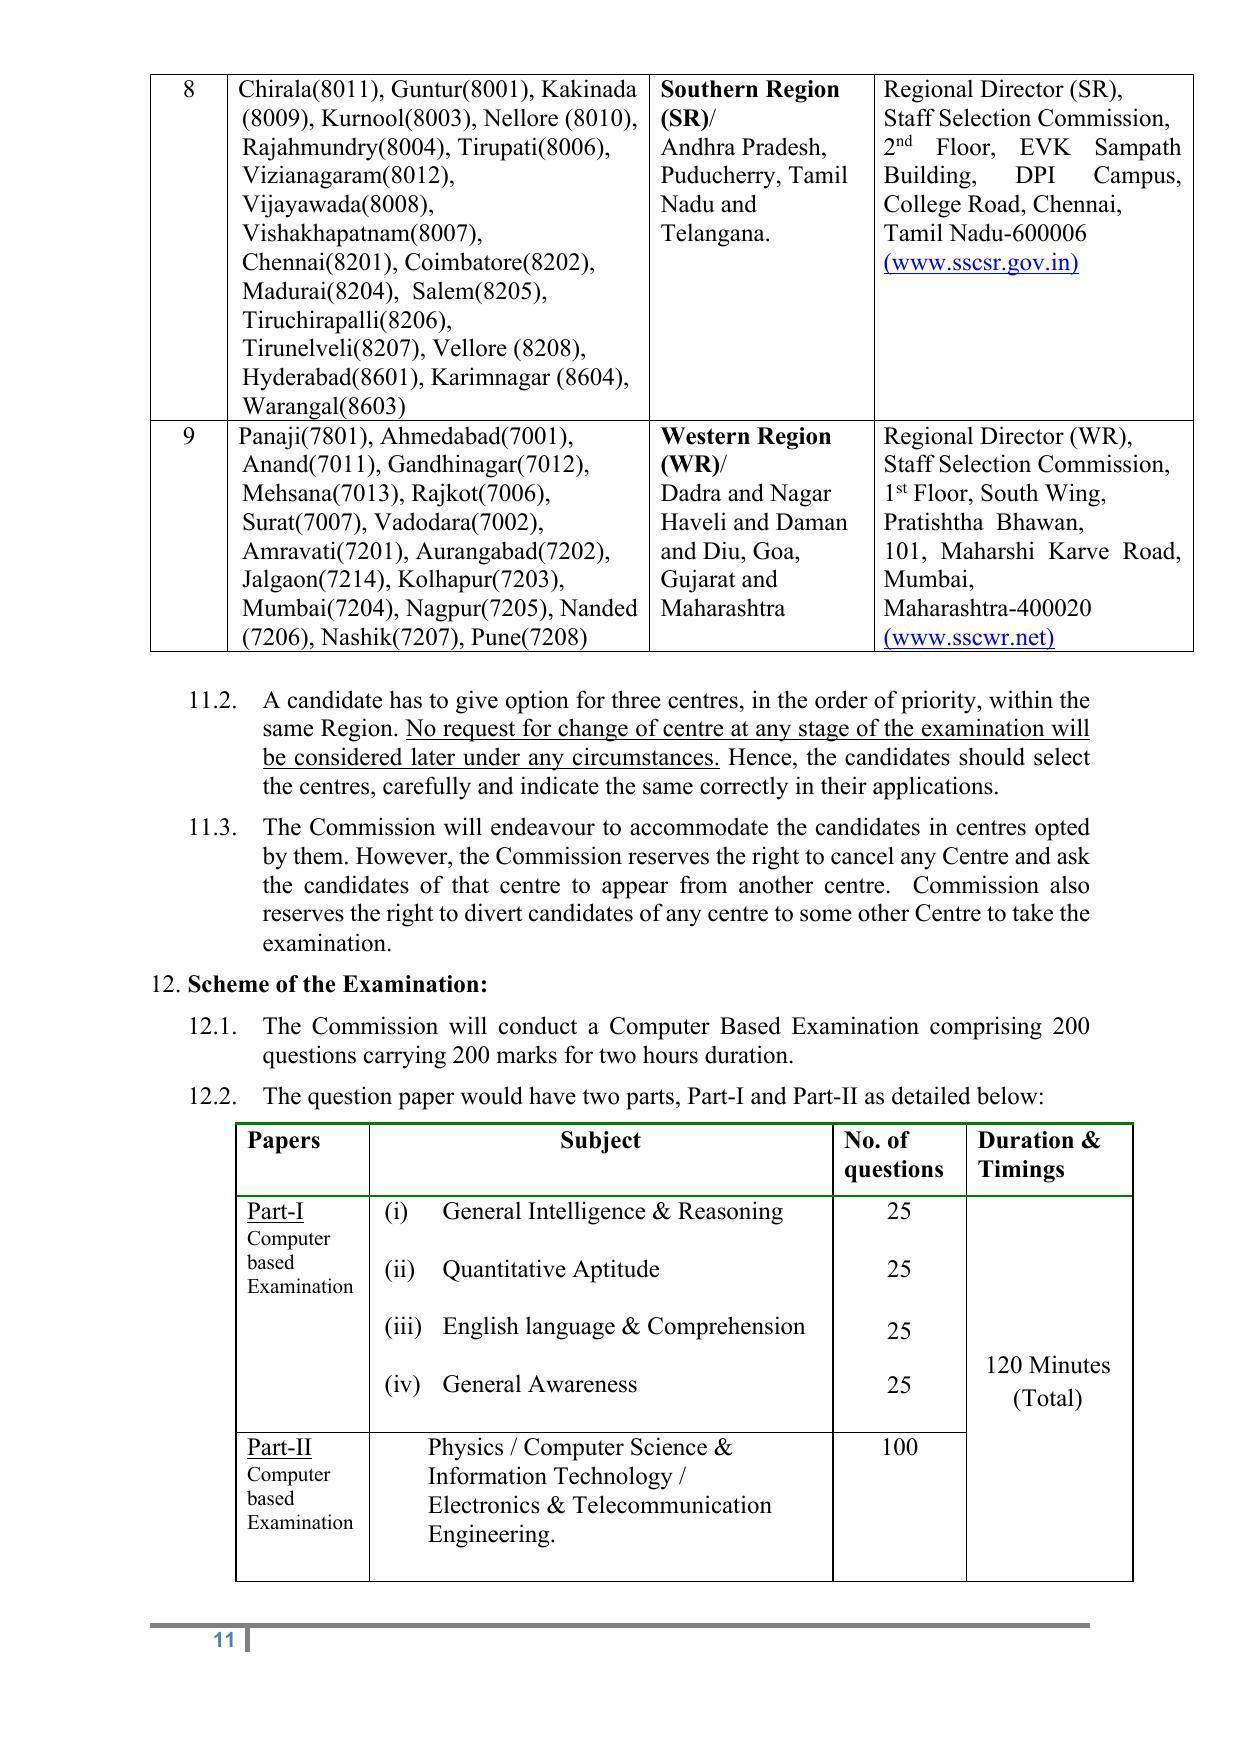 Staff Selection Commission (SSC) Scientific Assistant Recruitment 2022 - Page 20